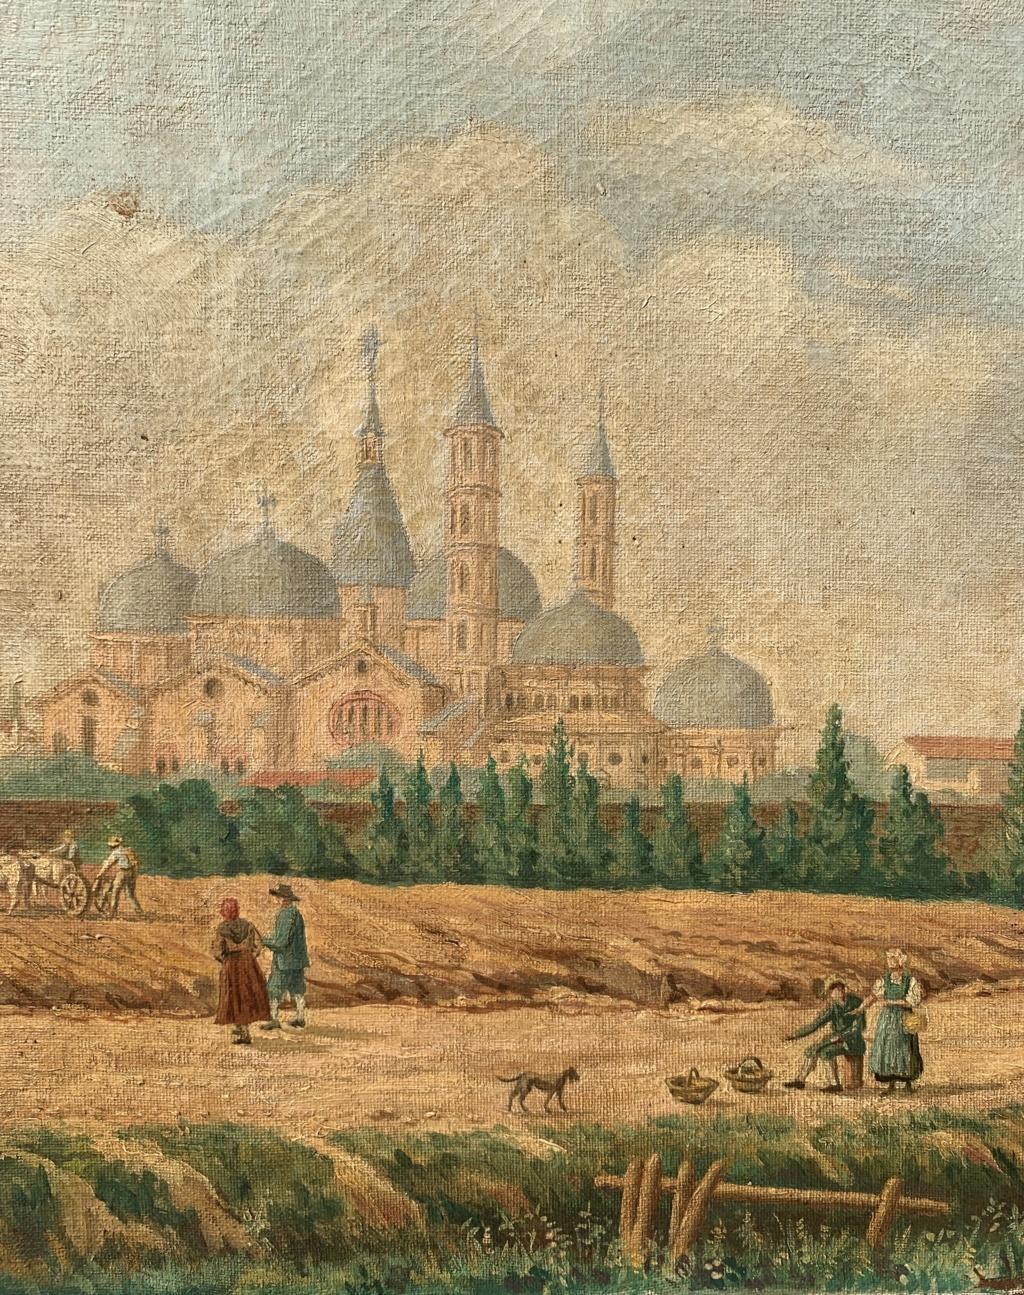 Vedustist painter (Veneto school) - 19th century landscape painting - Padova  - Old Masters Painting by Unknown